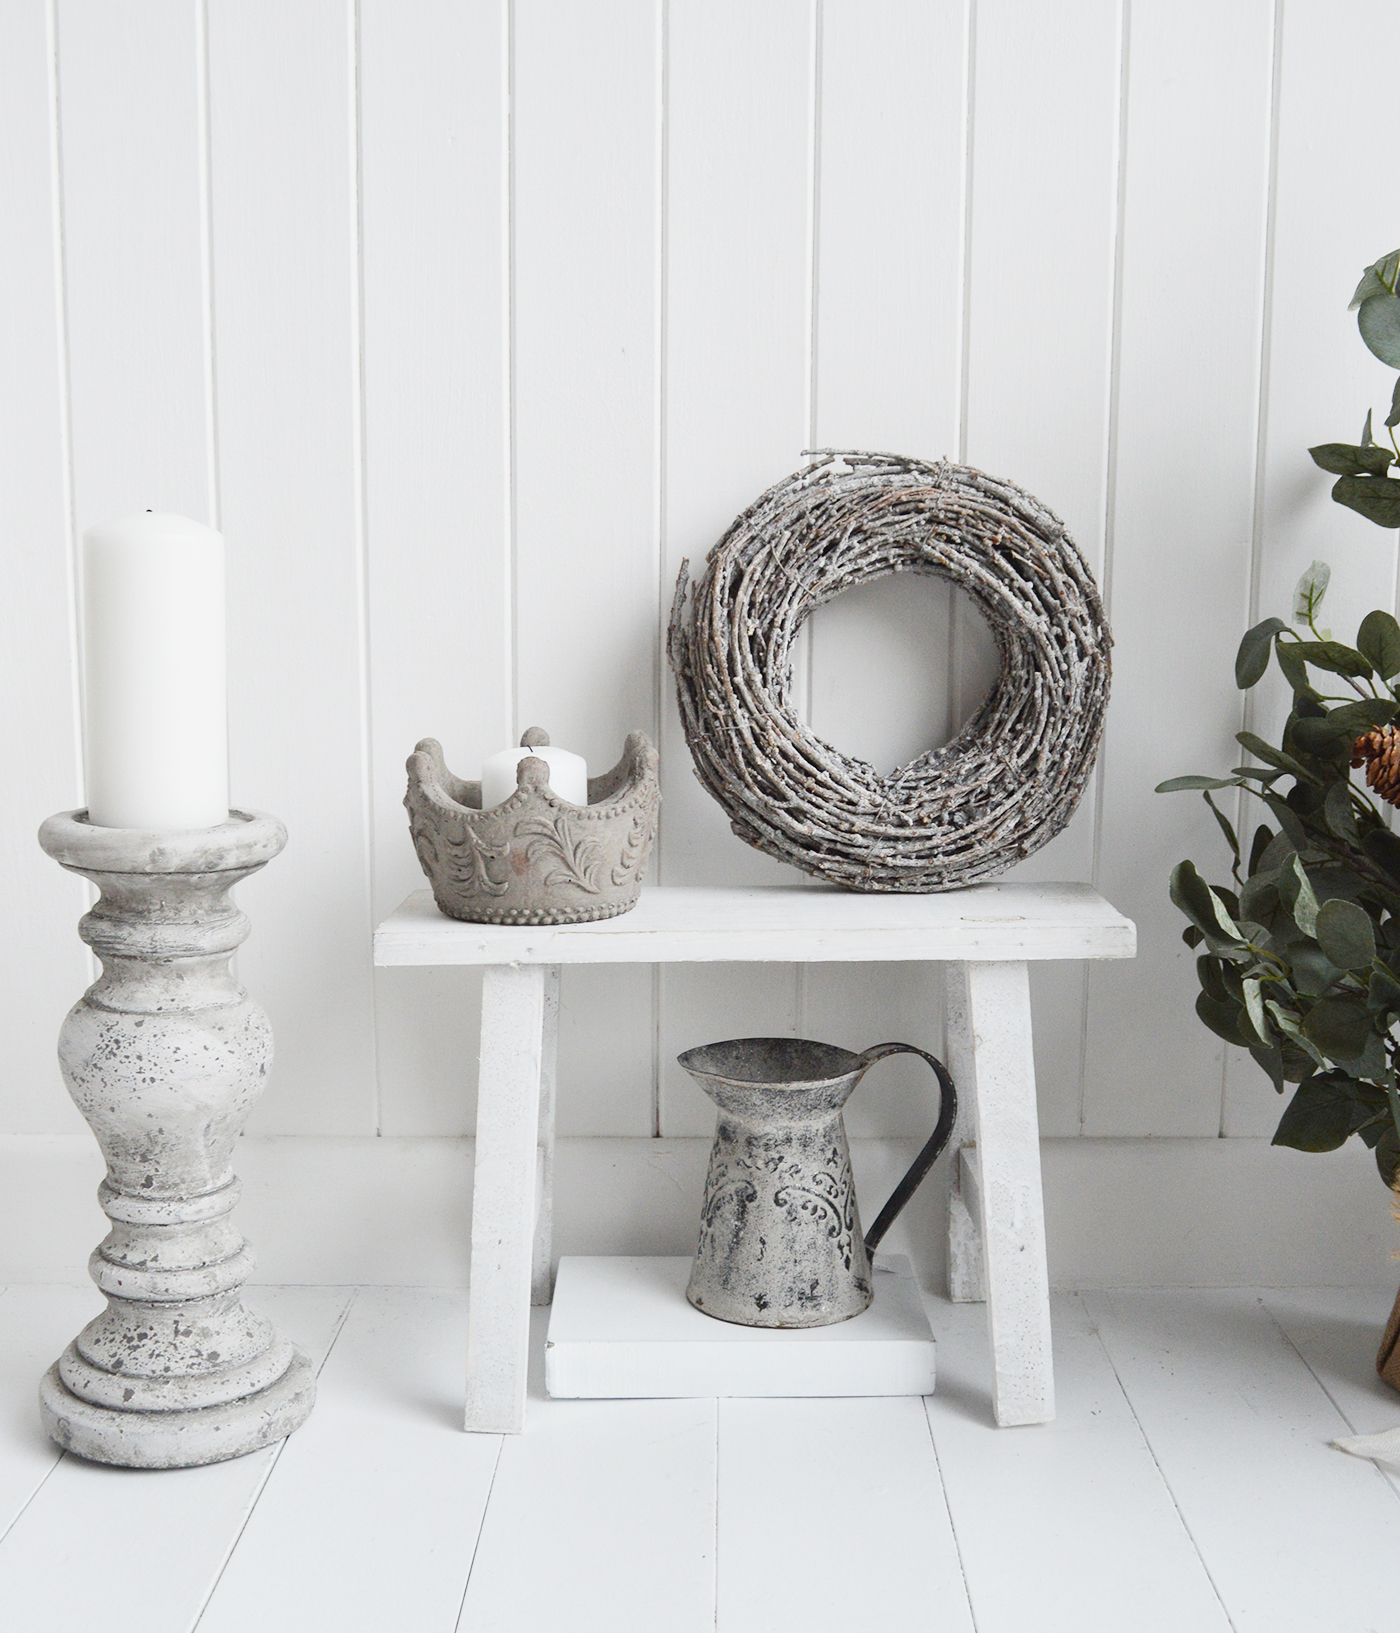 Grey Willow Wreath for a traditional New England look to your room from The White Lighthouse Furniture for the hallway, living room, bedroom and bathroom